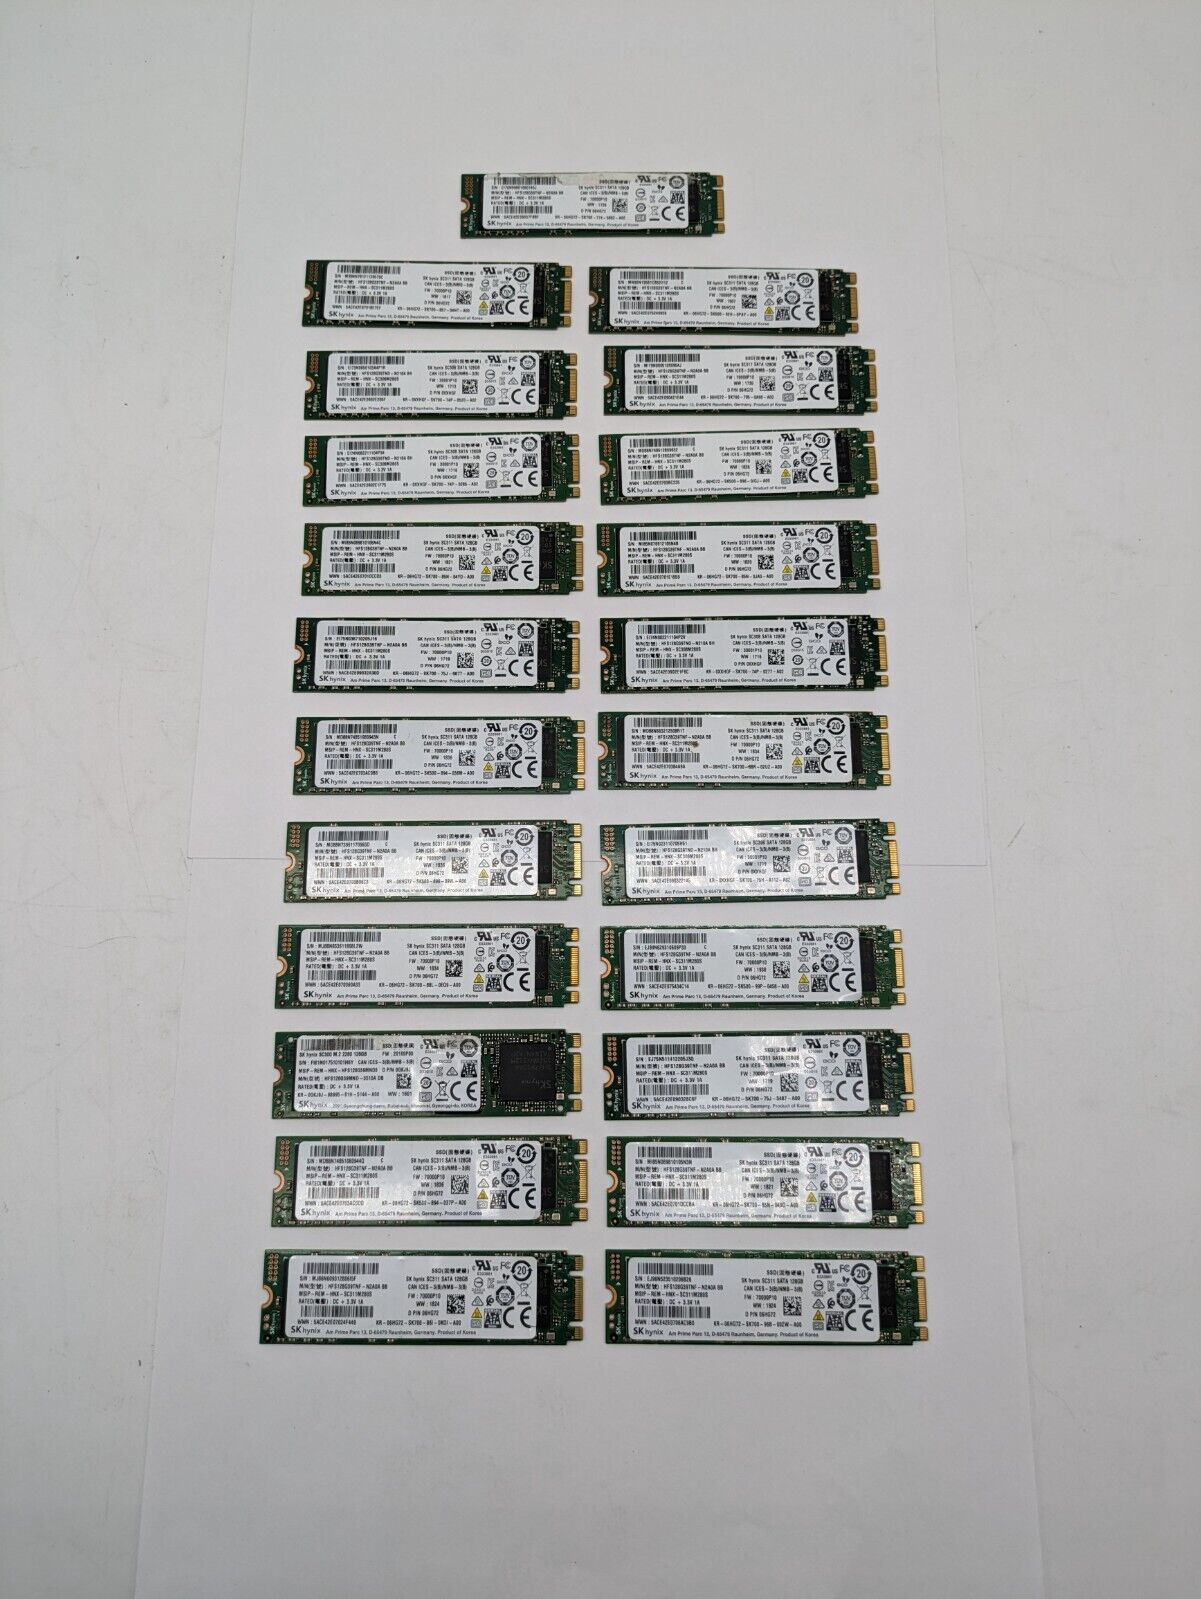 Lot of 23 Mixed SK Hynix SATA M.2 128GB Solid State Drives